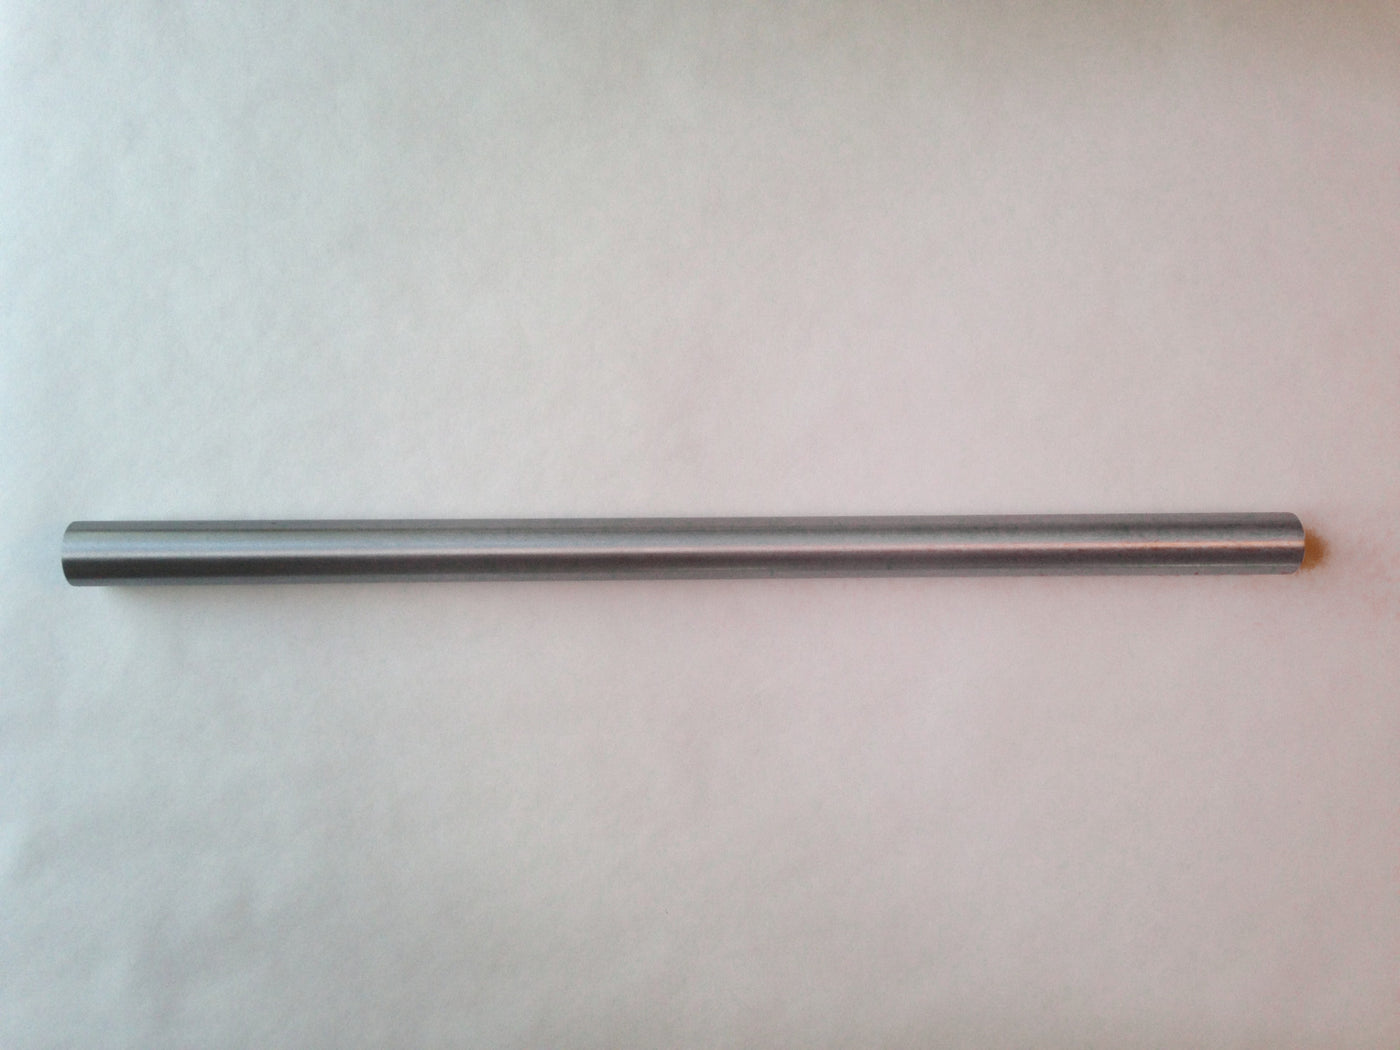 Columbus SL headtube - 31.7 dia. - 1mm wall - length = 600 for bicycle frame building